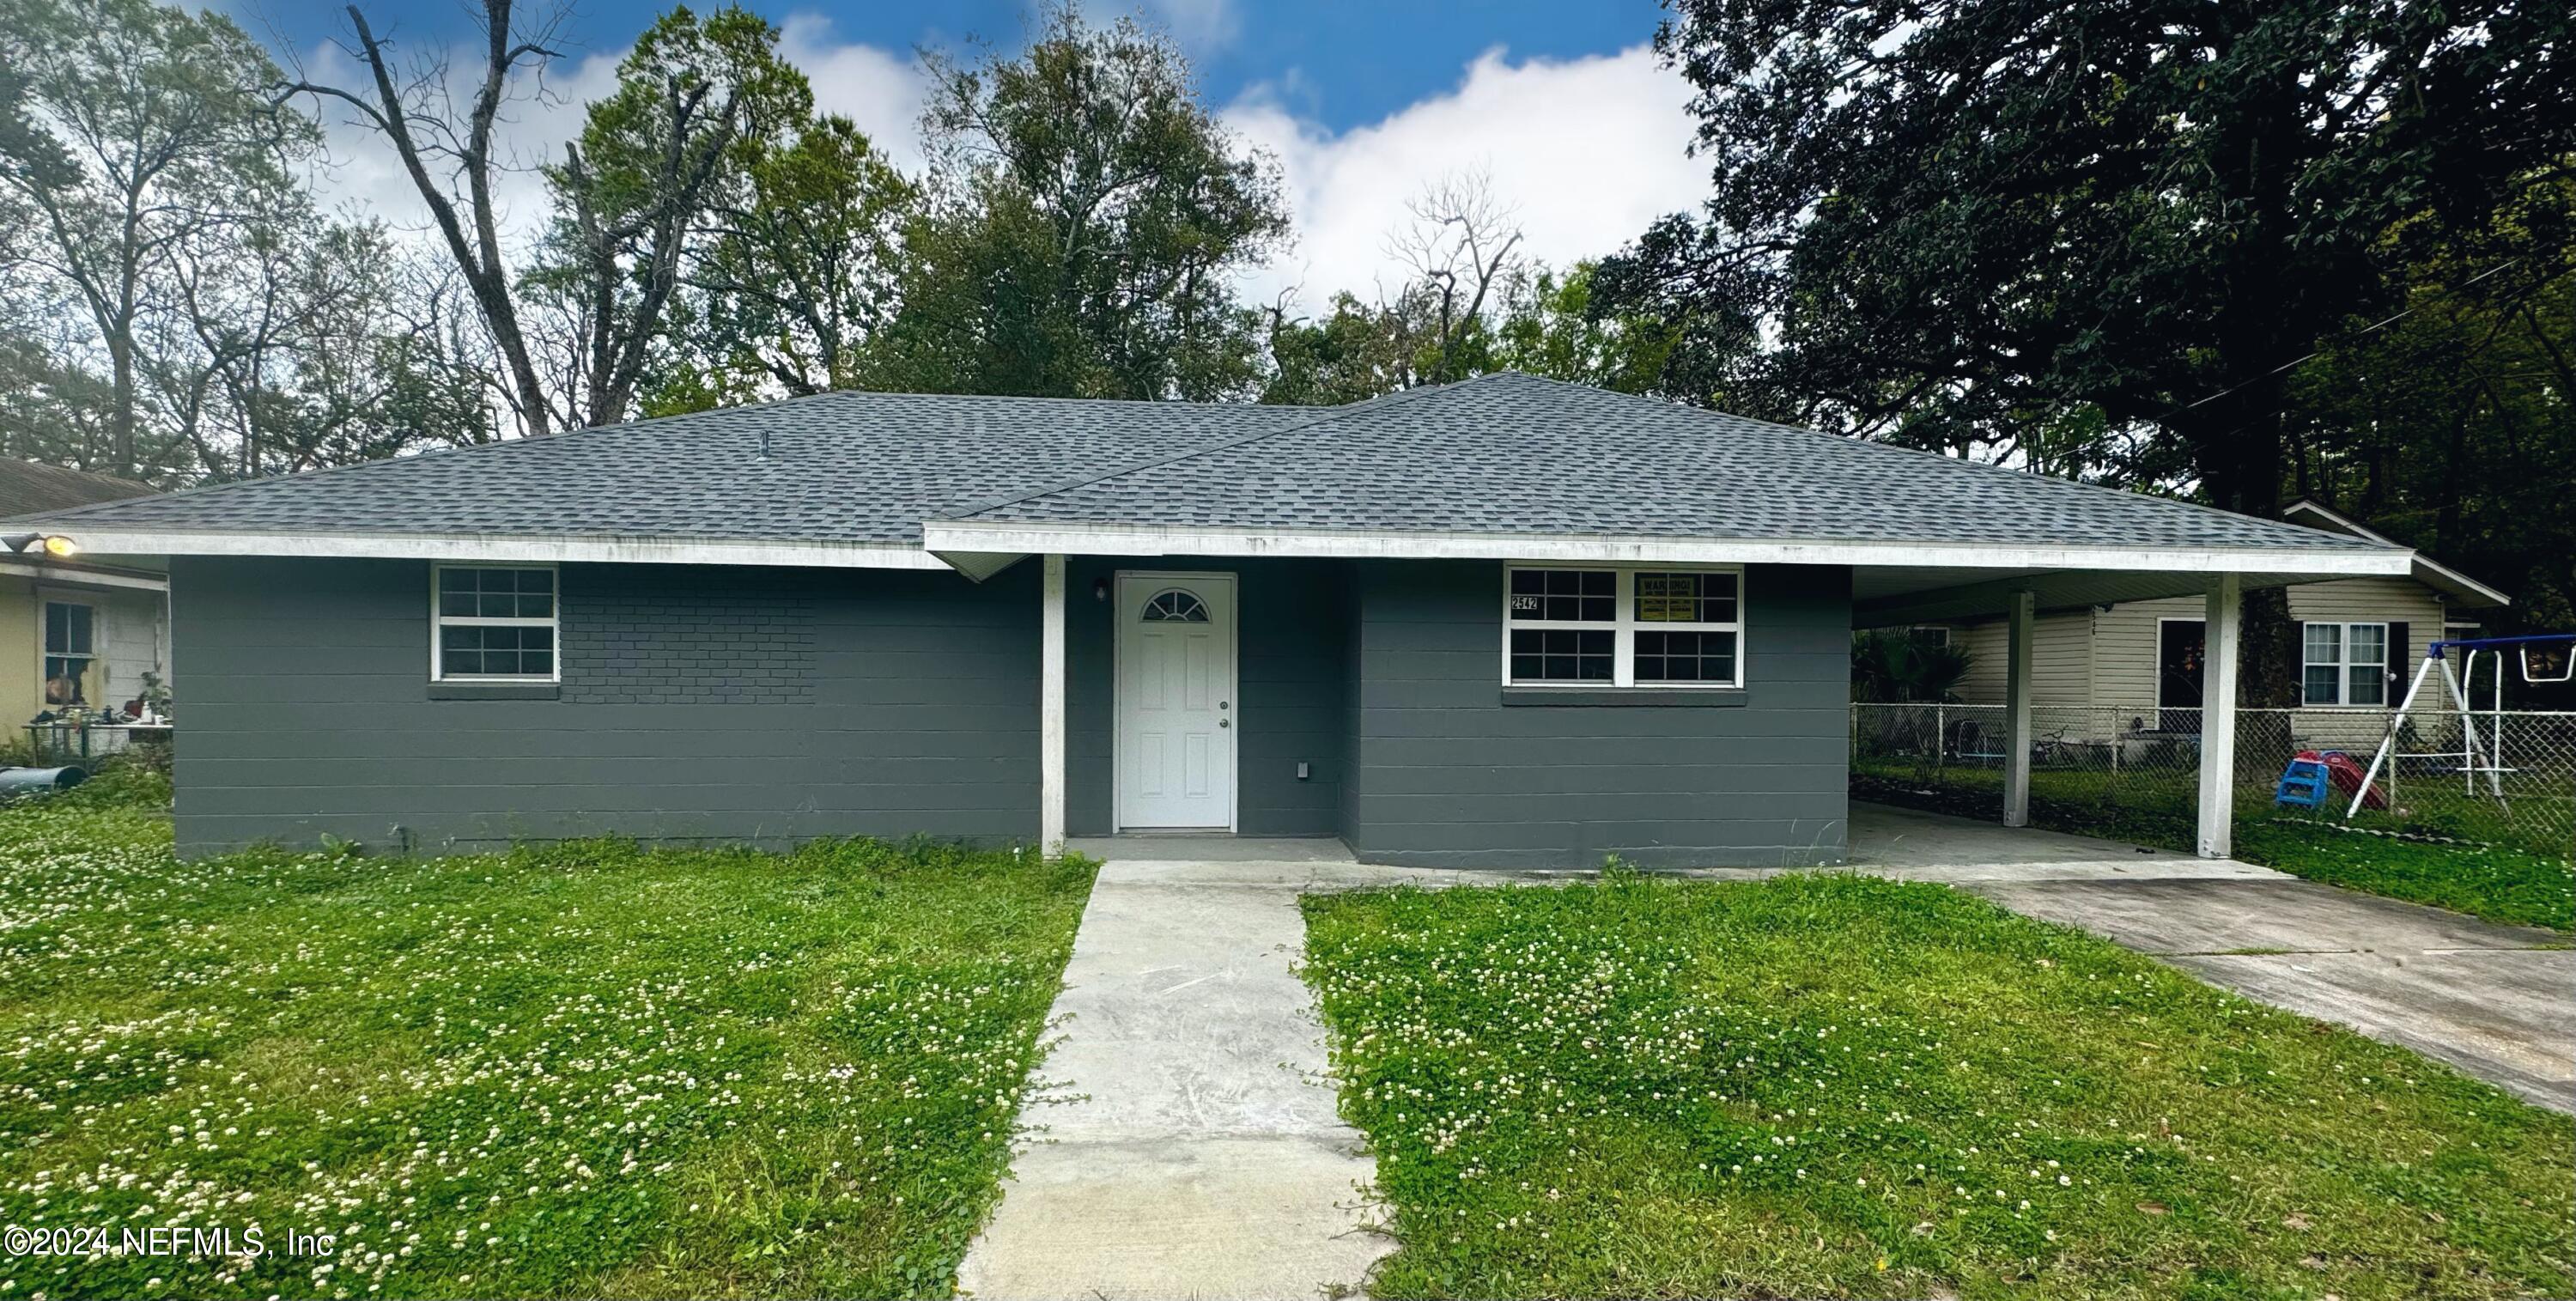 Jacksonville, FL home for sale located at 2542 LOWELL Avenue, Jacksonville, FL 32254